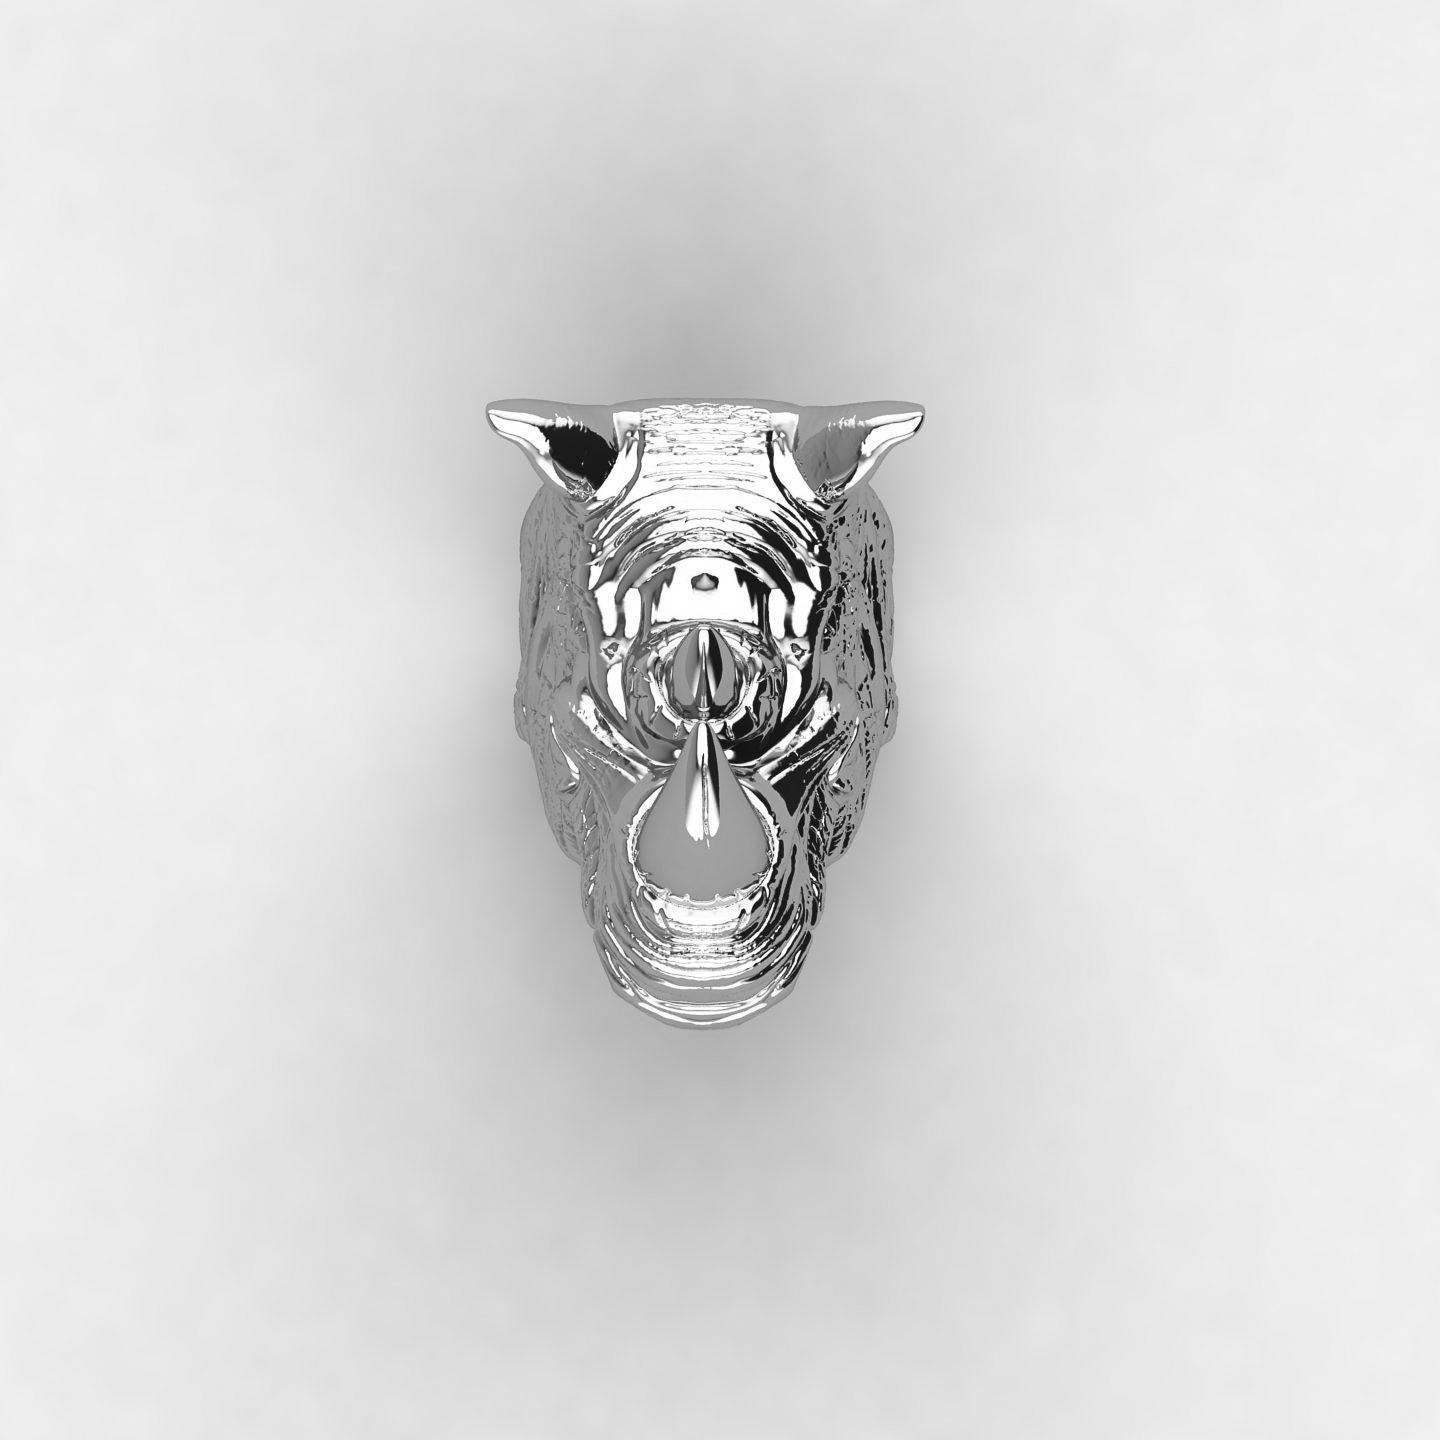 The Rhinoceros Ring it's a Solid Sterling Silver ring, no platings, a highly detailed piece of art representing our dear protected friends Rhinos.
A Statement piece, Solid piece of Sterling Silver ideal for those who love feeling the weight of their